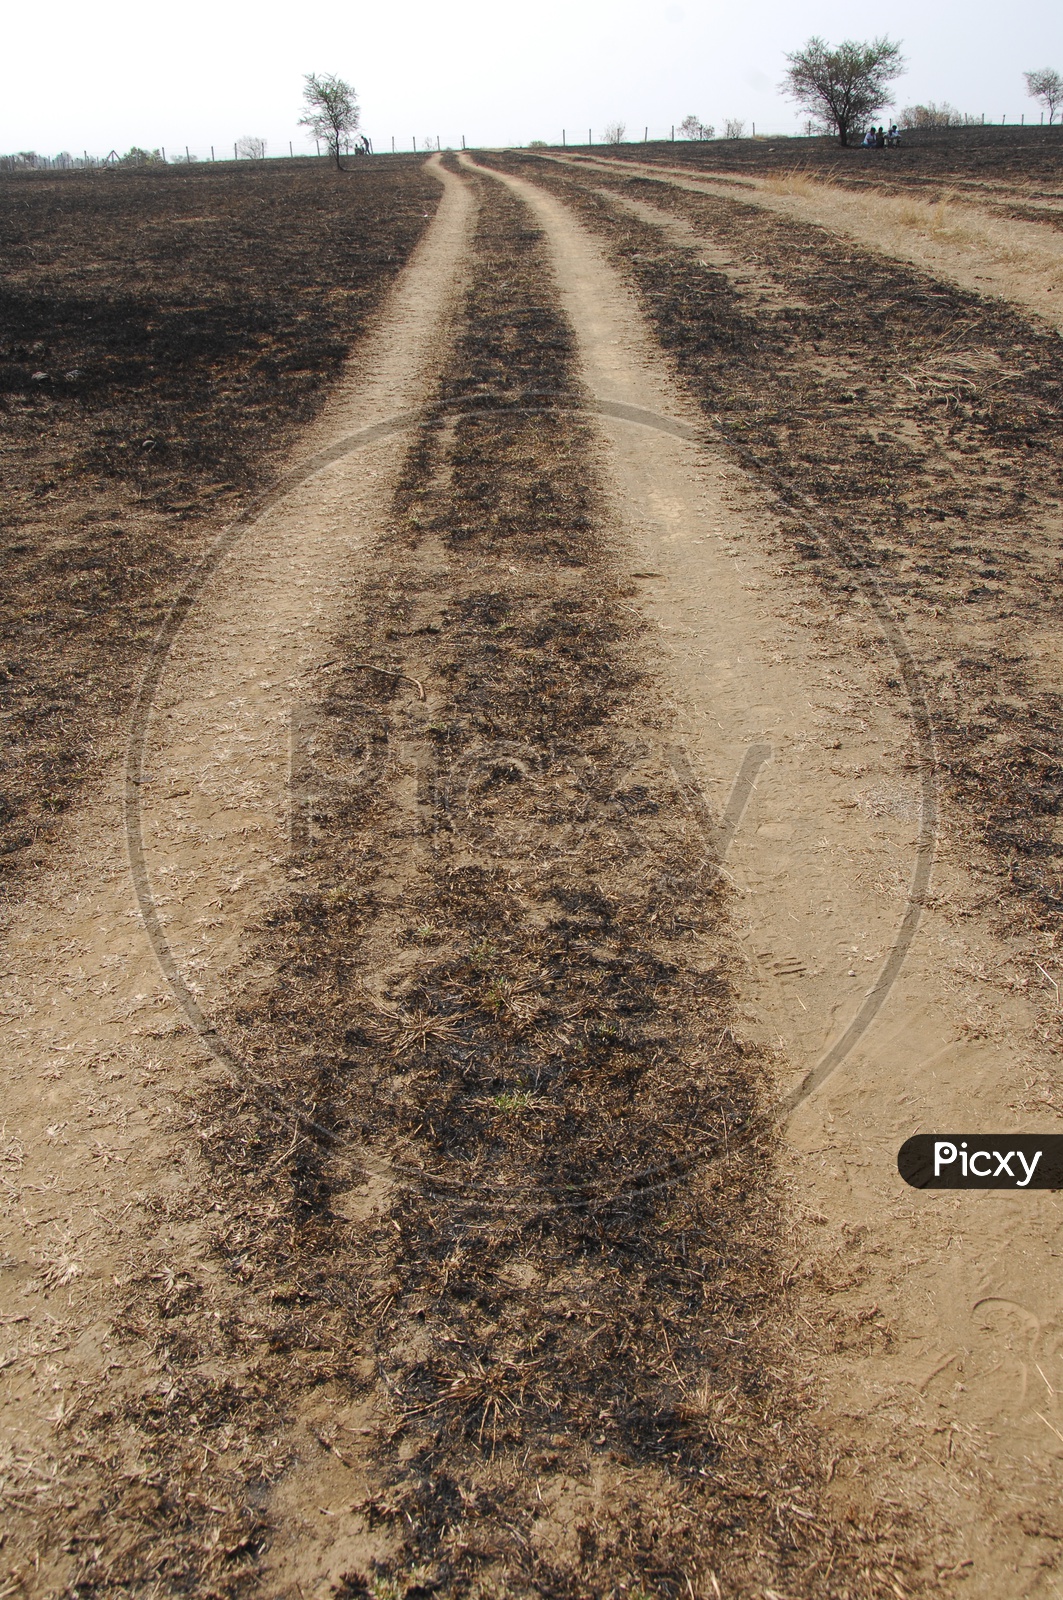 A dry land with burned grass